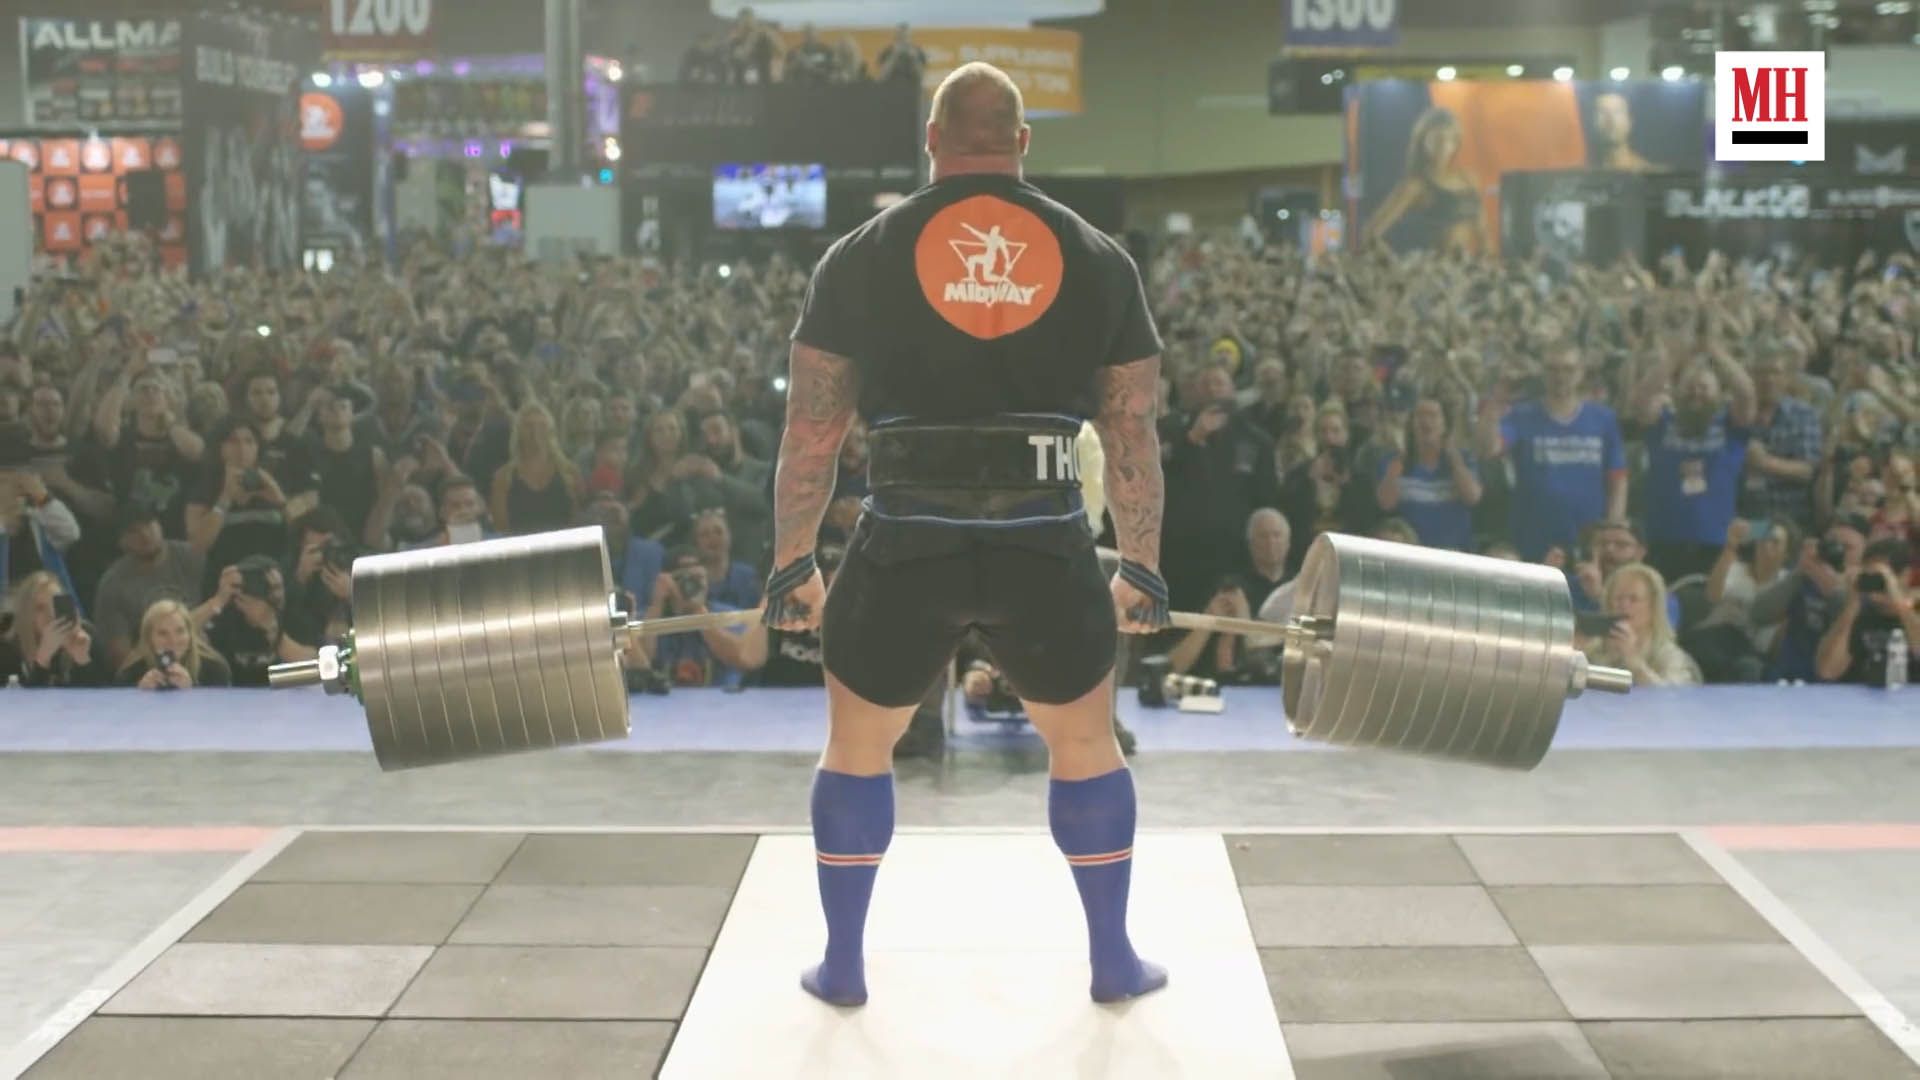 World's Strongest Man: Martins Licis thriving while social distancing